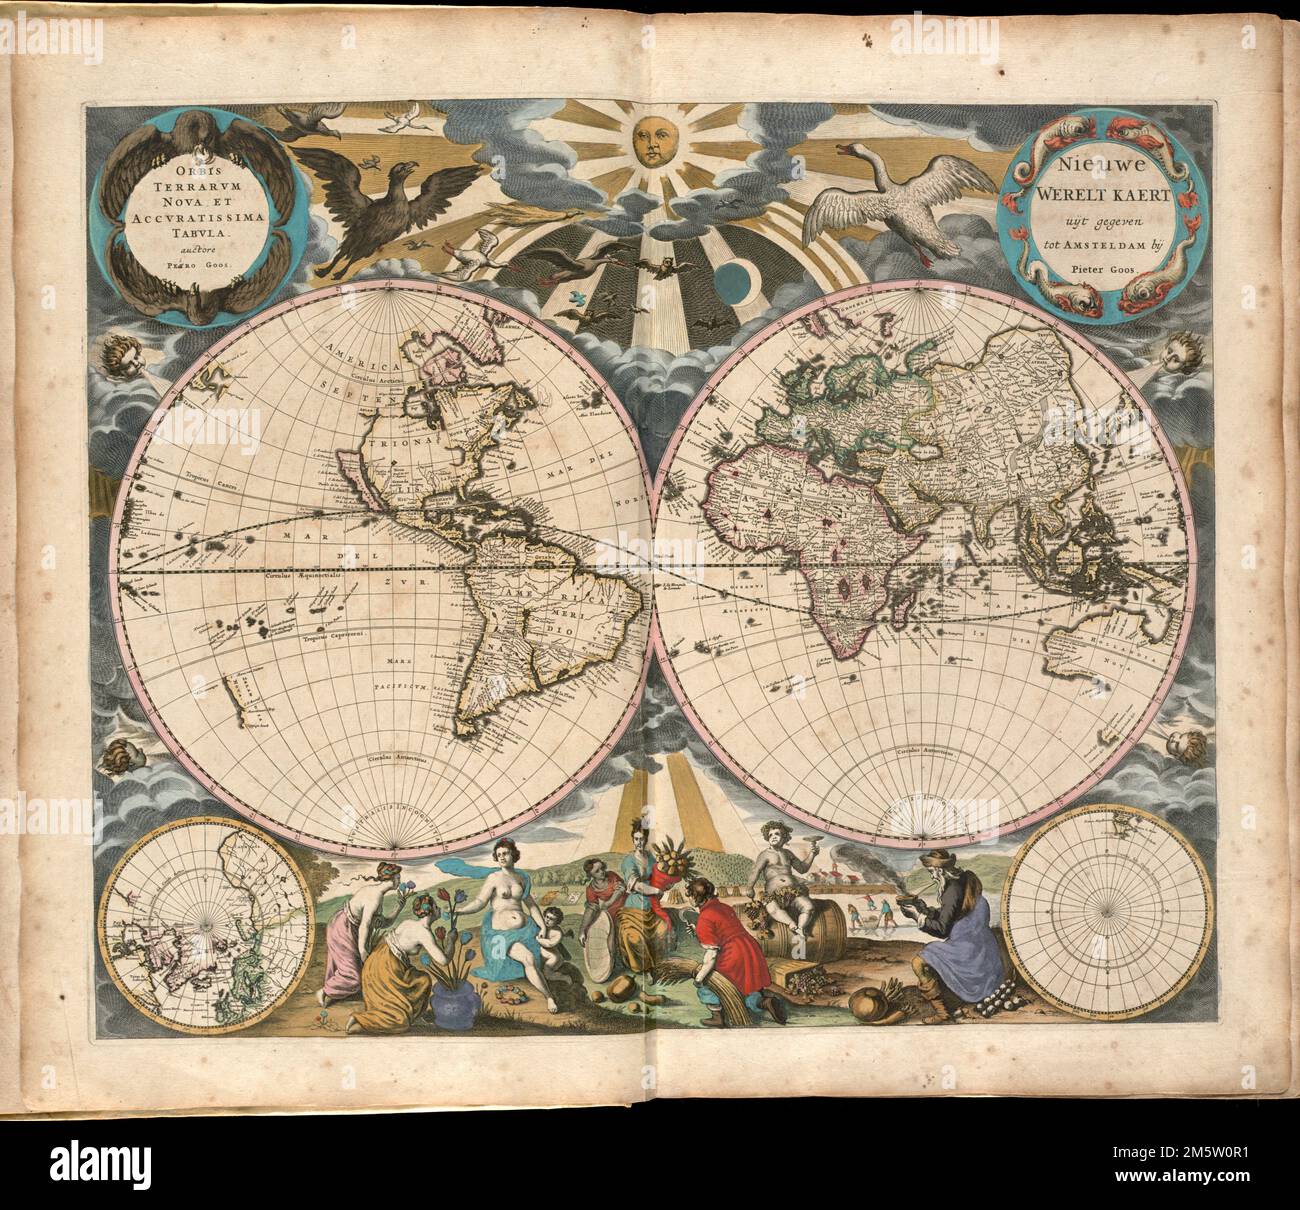 Orbis terrarum nova et accuratissima tabula. Double hemispherical map of the world. Appears in the author's De zee-atlas ofte water-wereld. t'Amsteldam: By Pieter Goos, 1672. Plate [1]. Cataloging, conservation, and digitization made possible in part by The National Endowment for the Humanities: Exploring the human endeavor.. Regions and Seasons: Allegorical figures of the seasons – both male and female – along with their characteristic symbols, are placed in the lower center of this double-hemisphere world map. Spring with her flowers sits near Summer with the Horn of Plenty, while “Old Man” Stock Photo